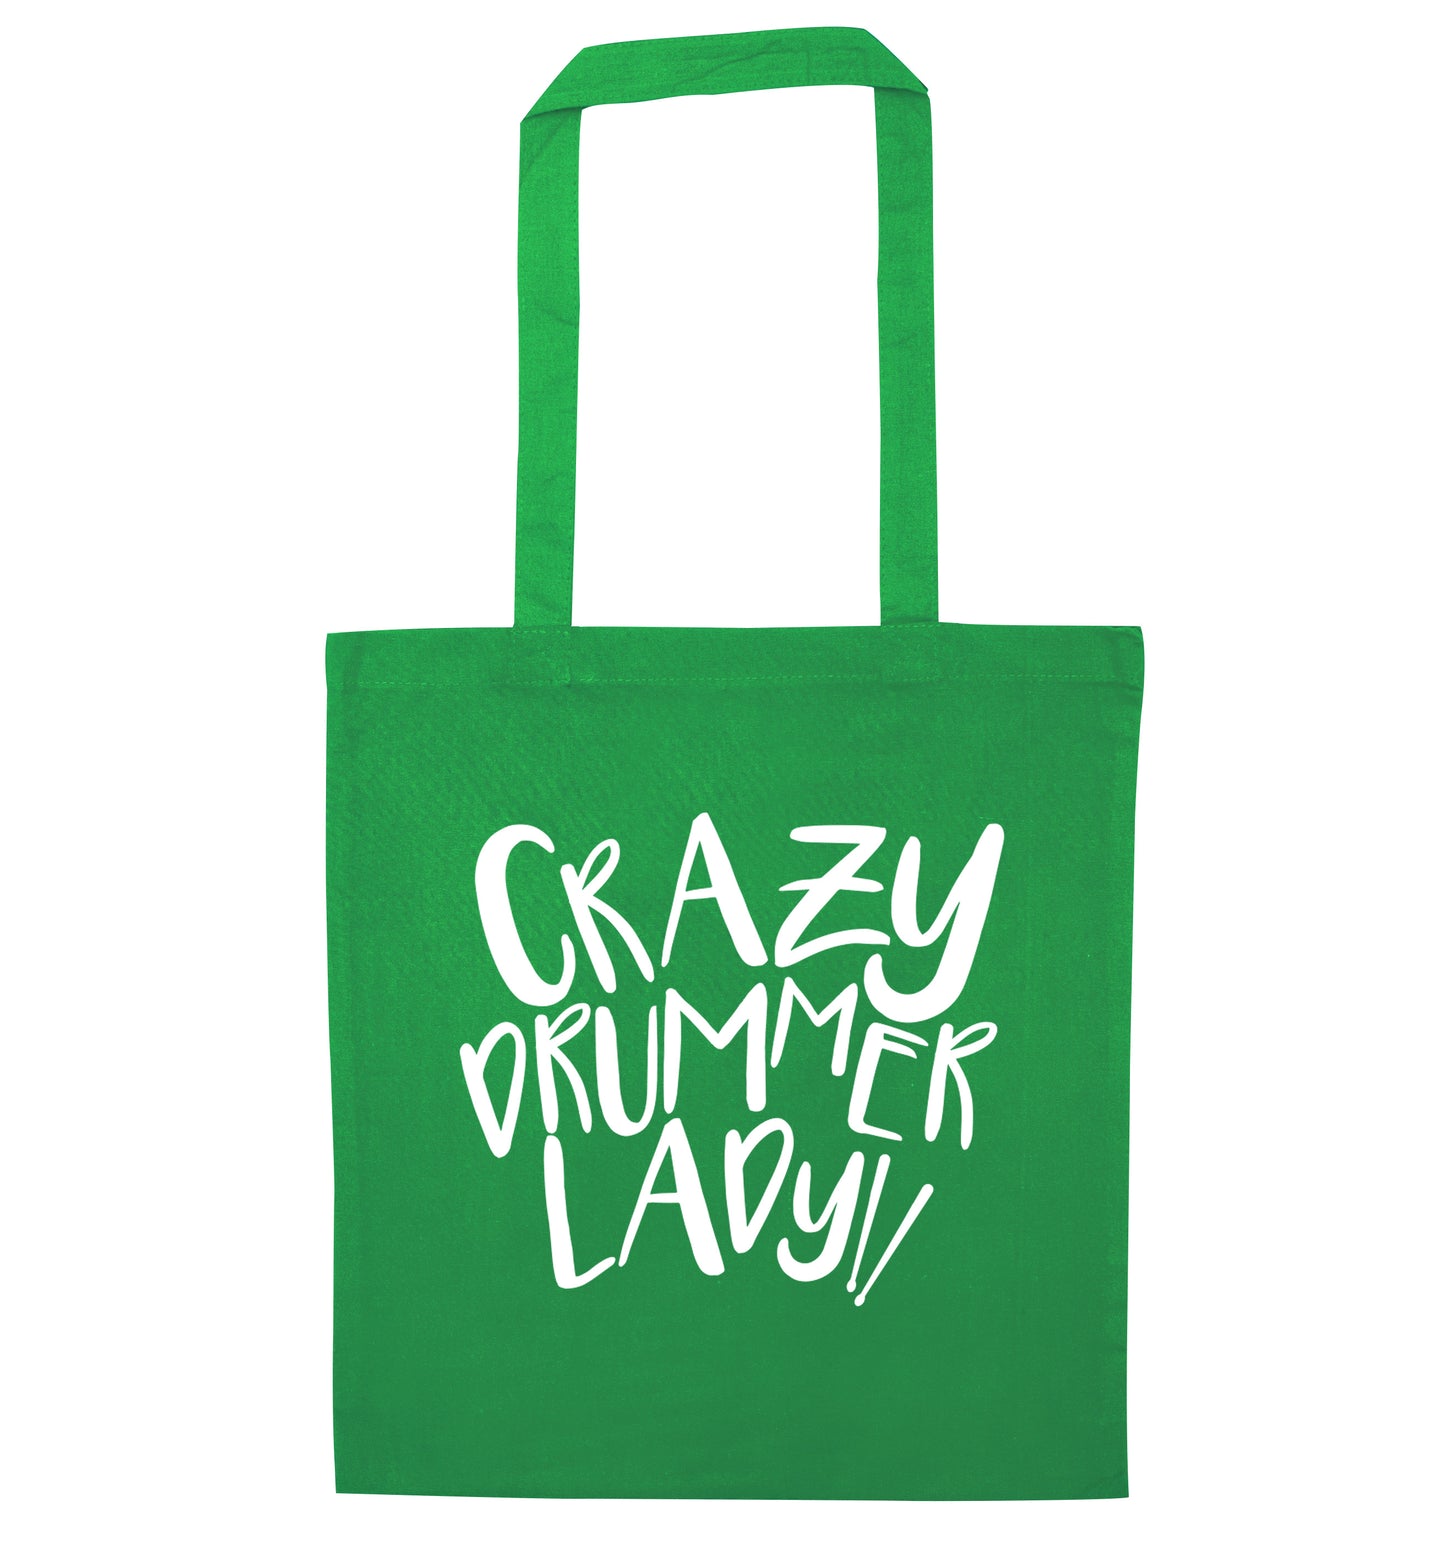 Crazy drummer lady green tote bag